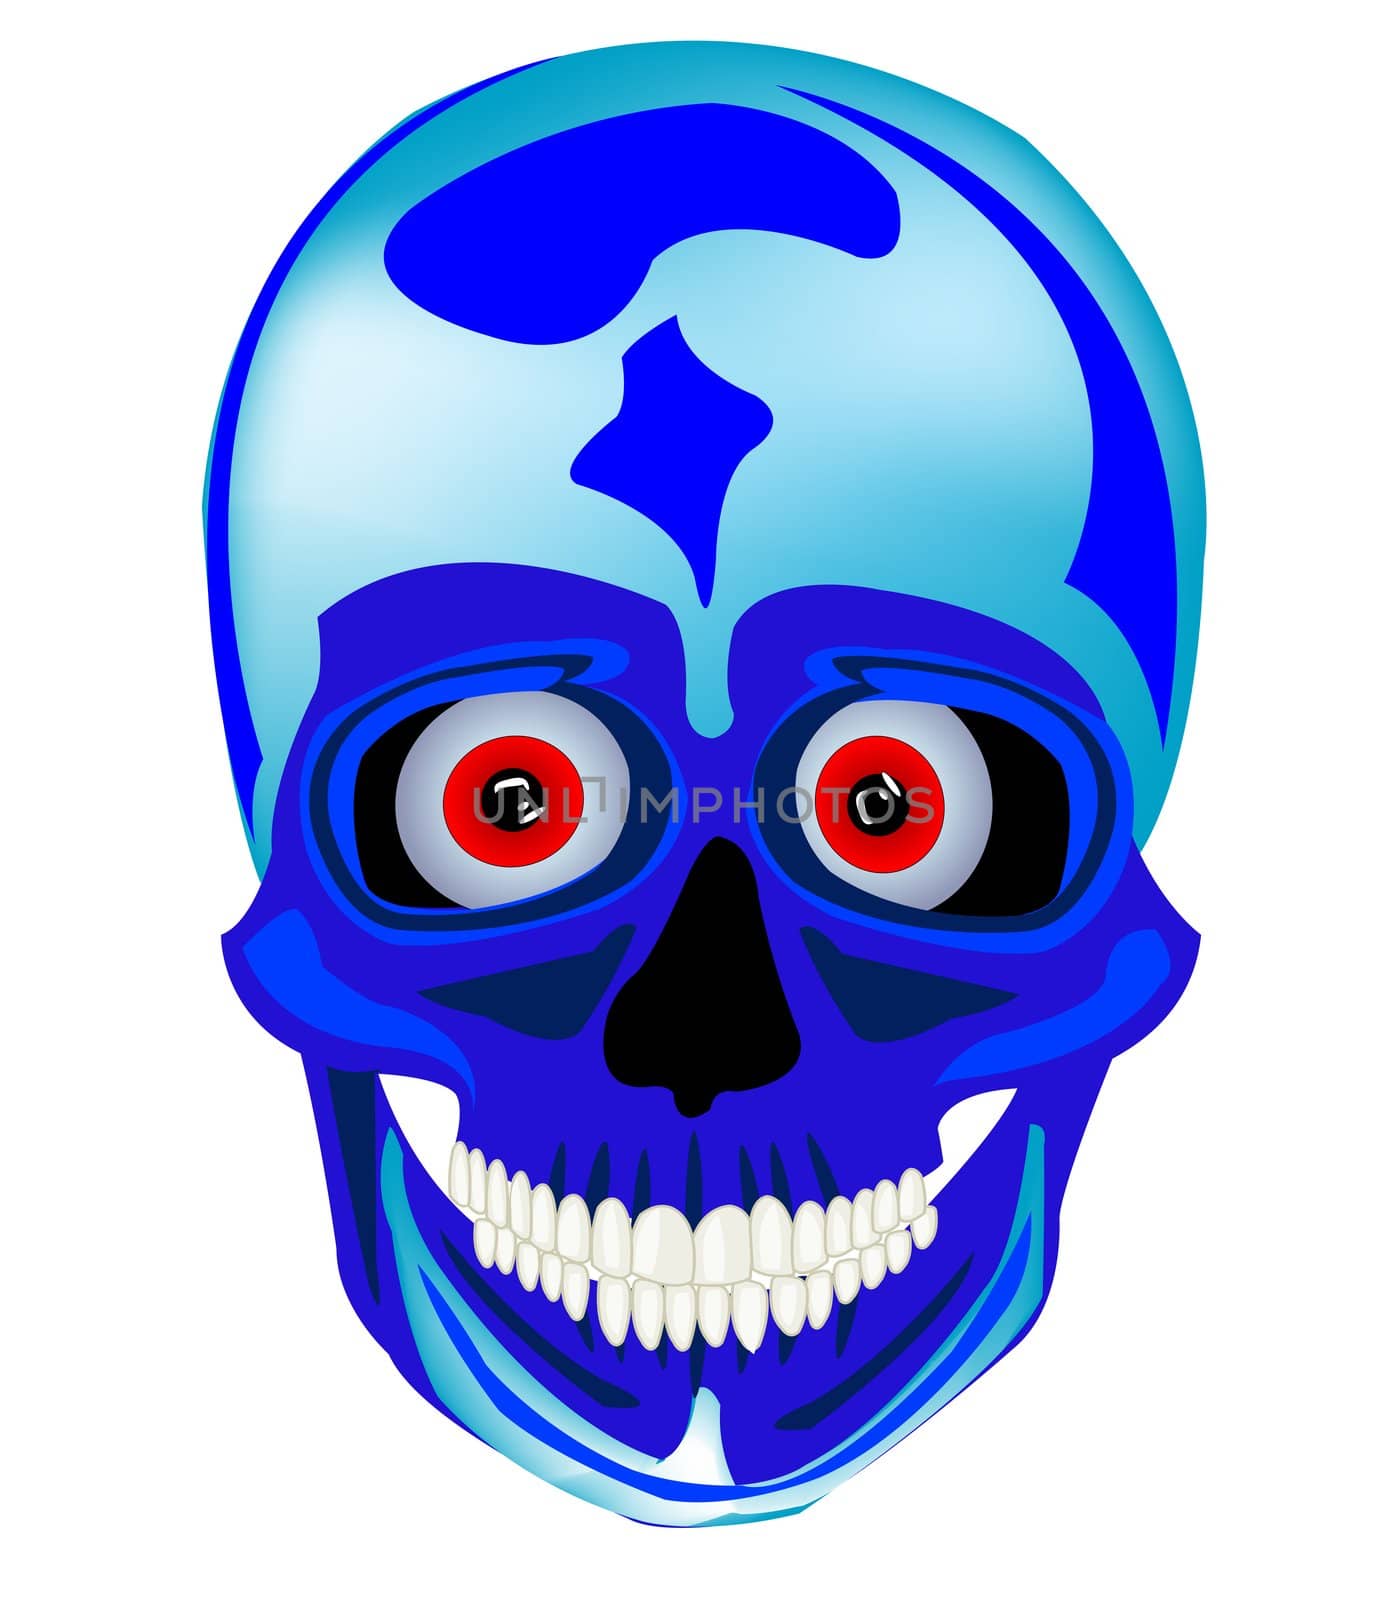 Cartoon skull of the person on white background